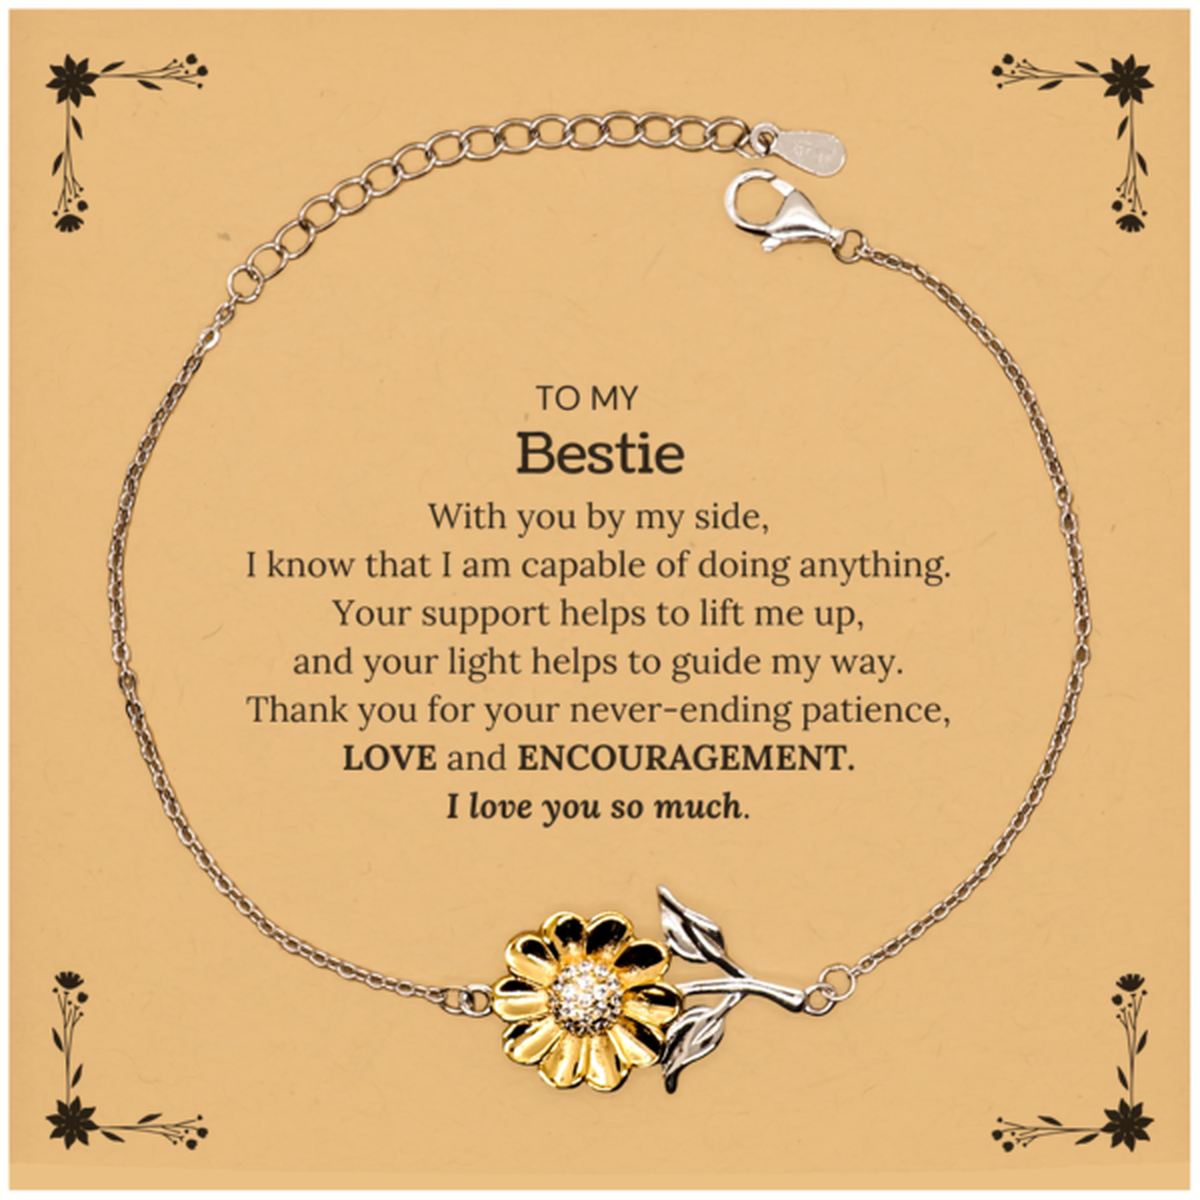 Appreciation Bestie Sunflower Bracelet Gifts, To My Bestie Birthday Christmas Wedding Keepsake Gifts for Bestie With you by my side, I know that I am capable of doing anything. I love you so much